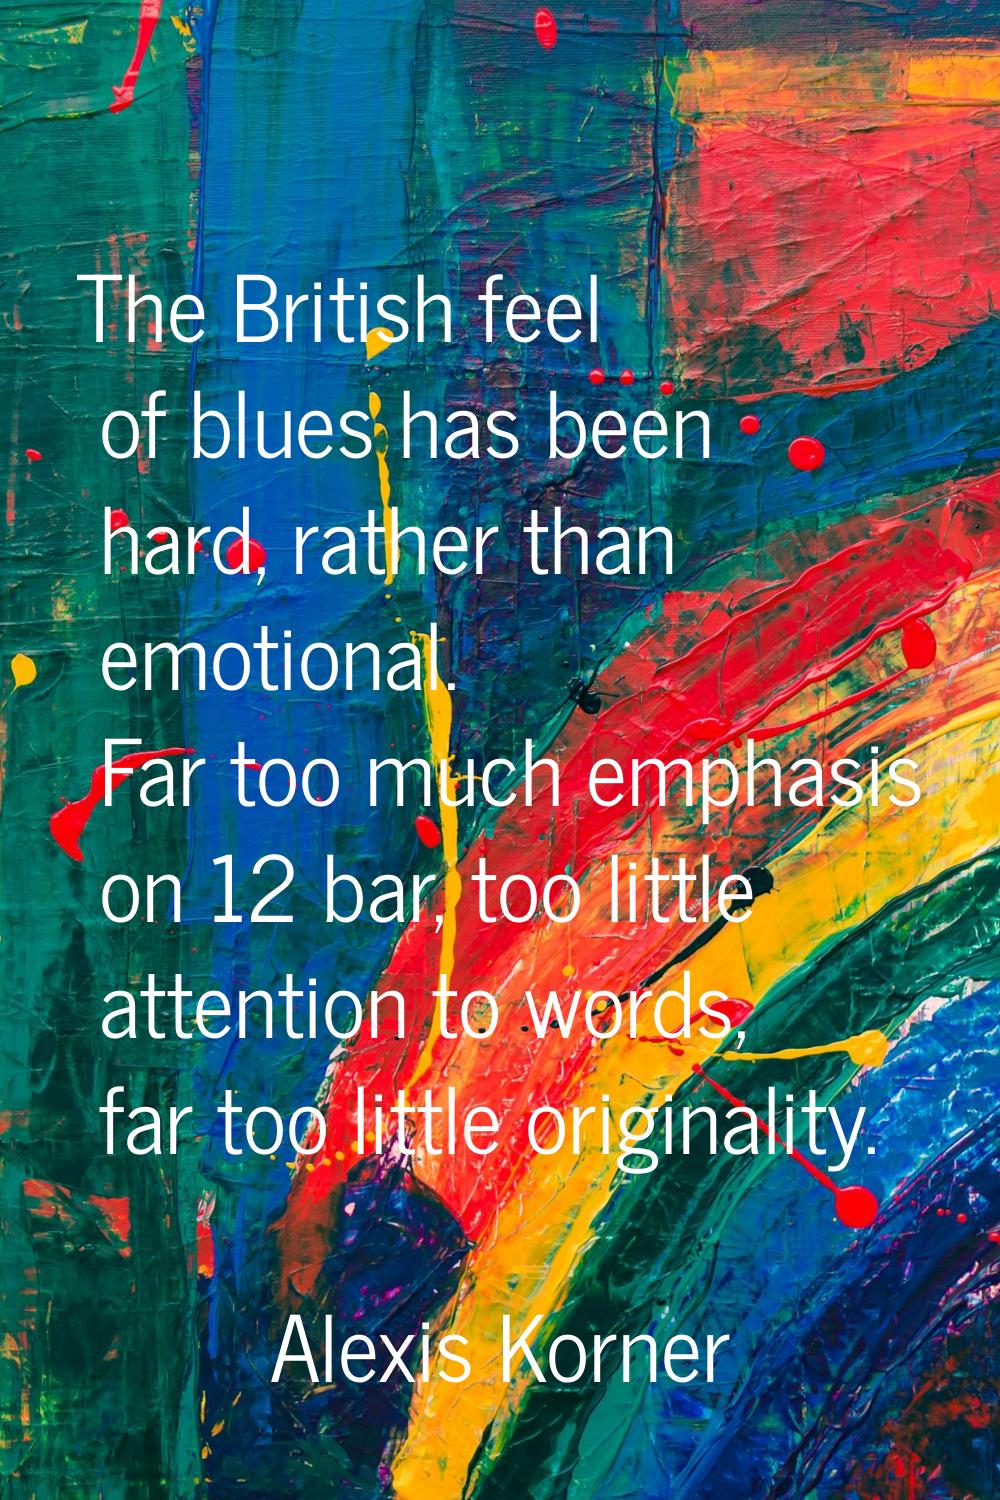 The British feel of blues has been hard, rather than emotional. Far too much emphasis on 12 bar, to